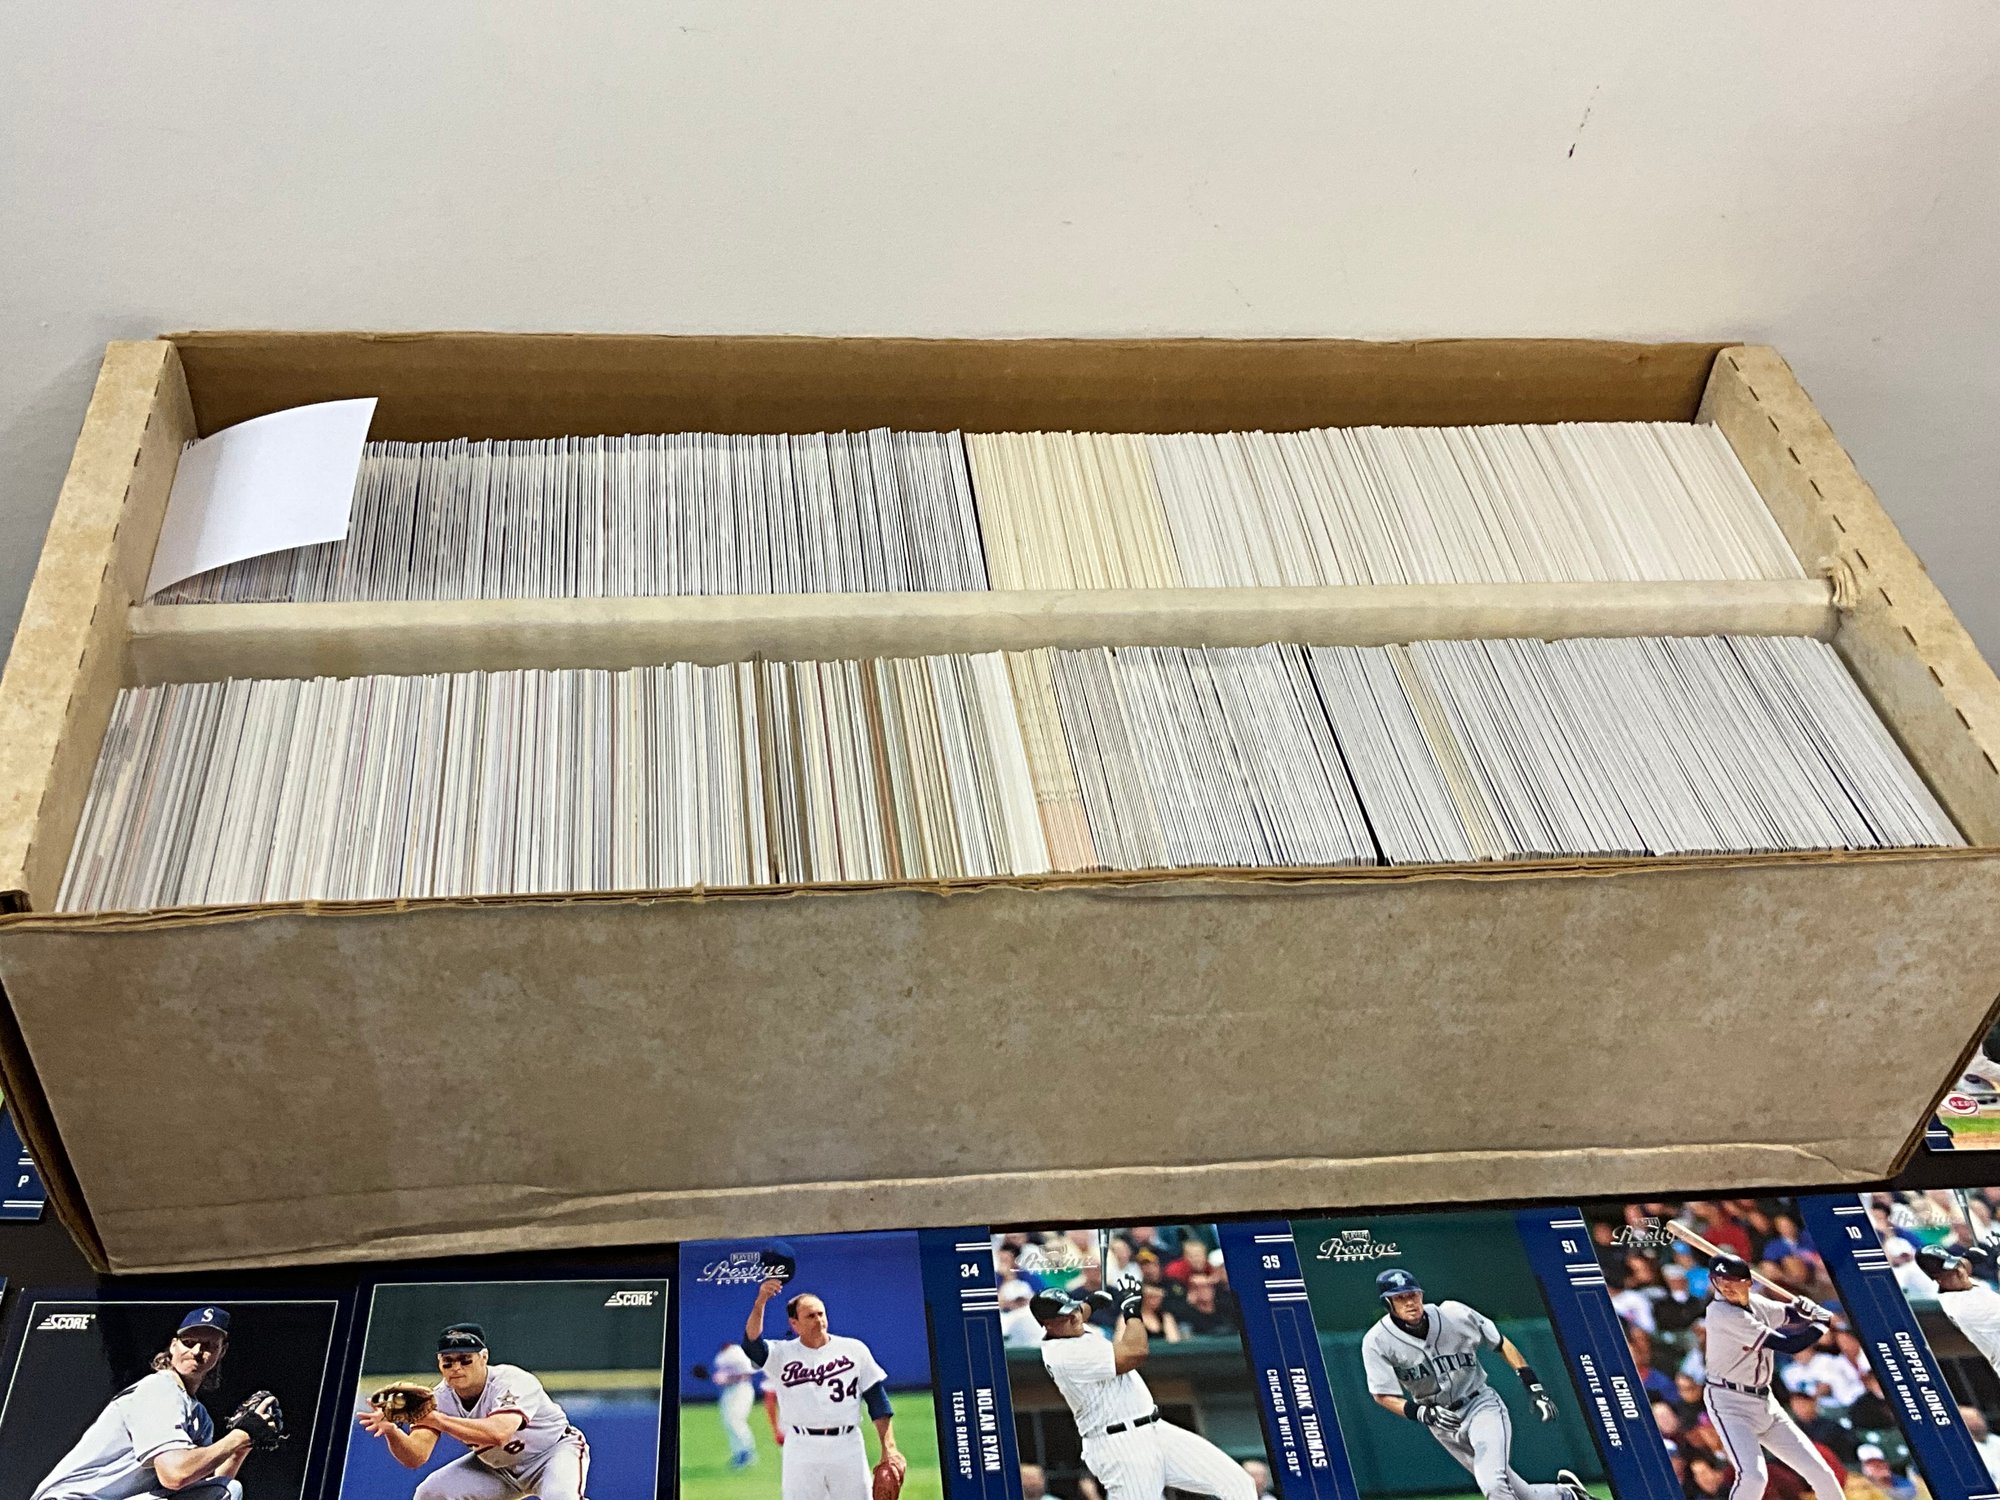 2 Row Box Of Baseball Cards With Rookies Of David Wright, Zimmerman ...